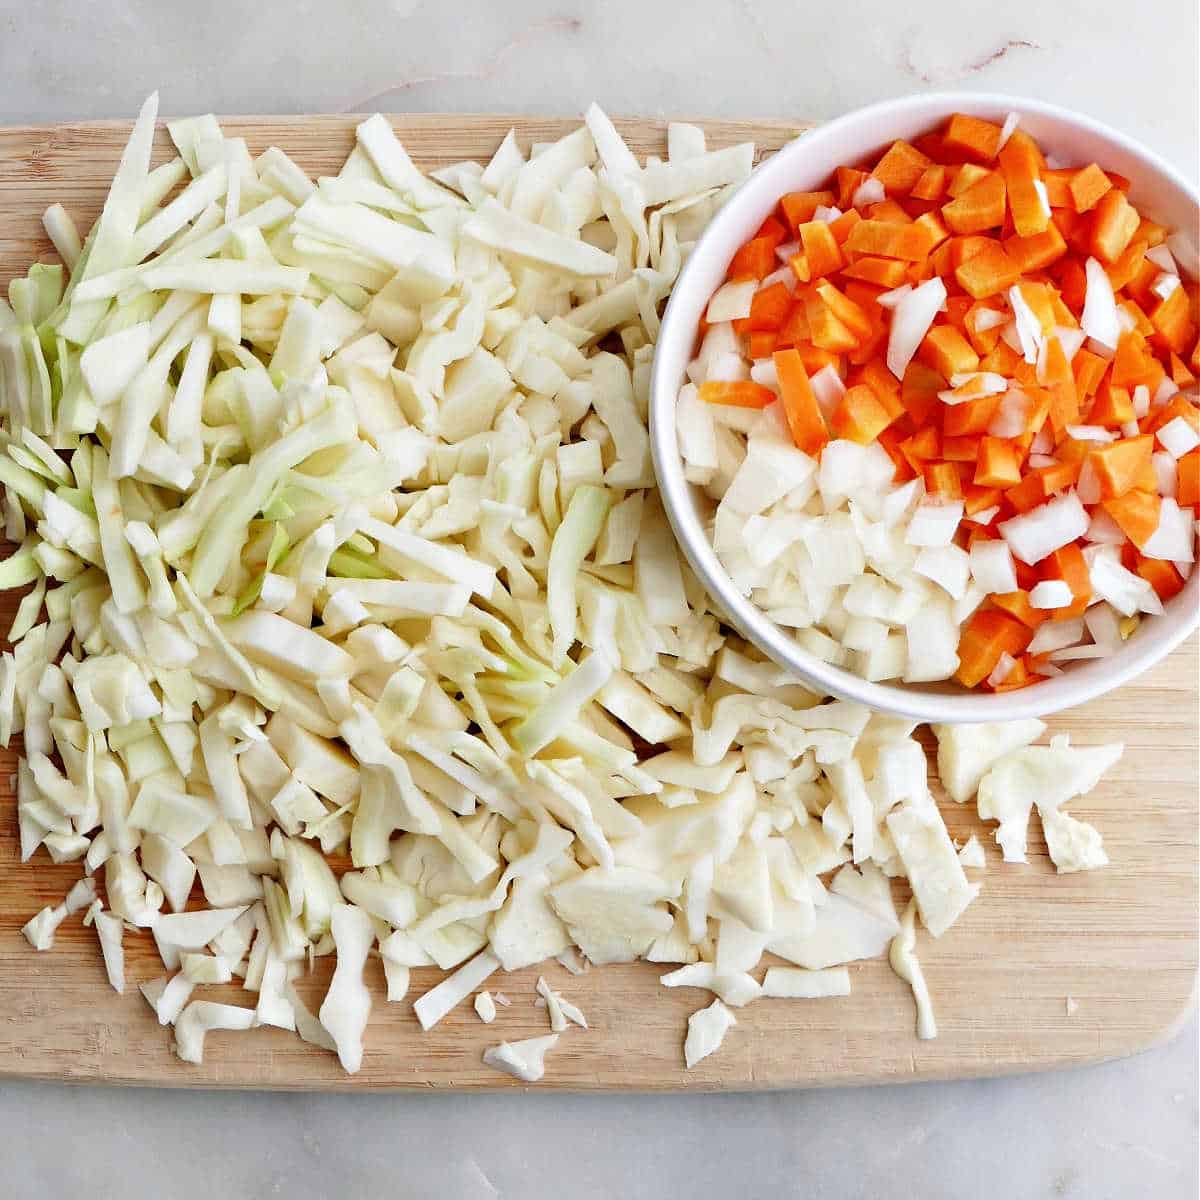 sliced cabbage on a cutting board next to bowl with onions and carrots